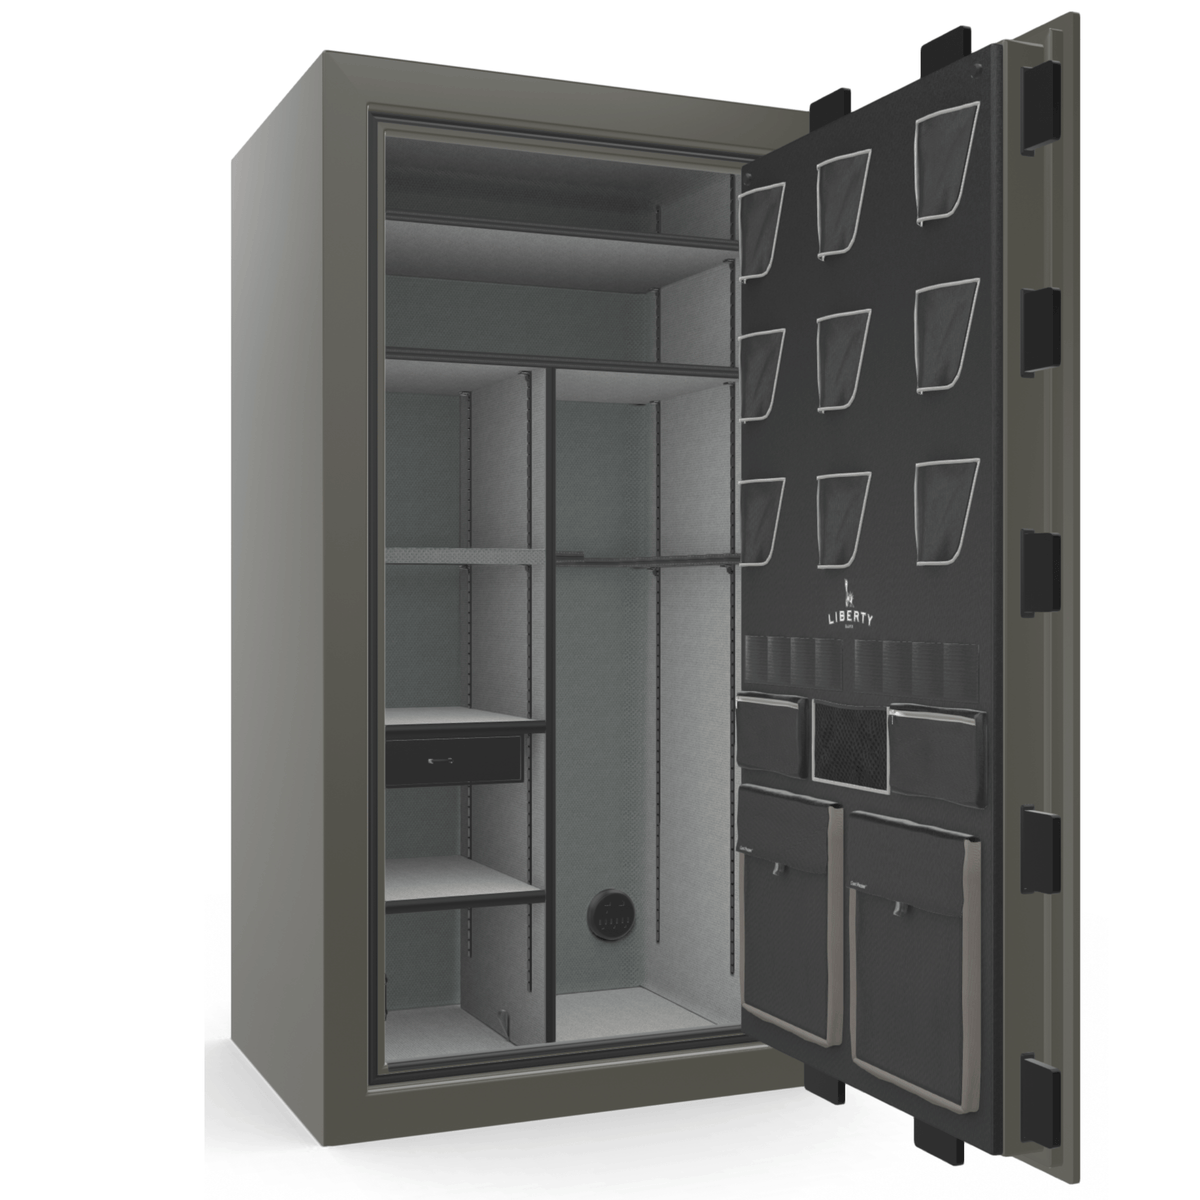 Classic Plus Series | Level 7 Security | 110 Minute Fire Protection | Liberty Safe Norcal.